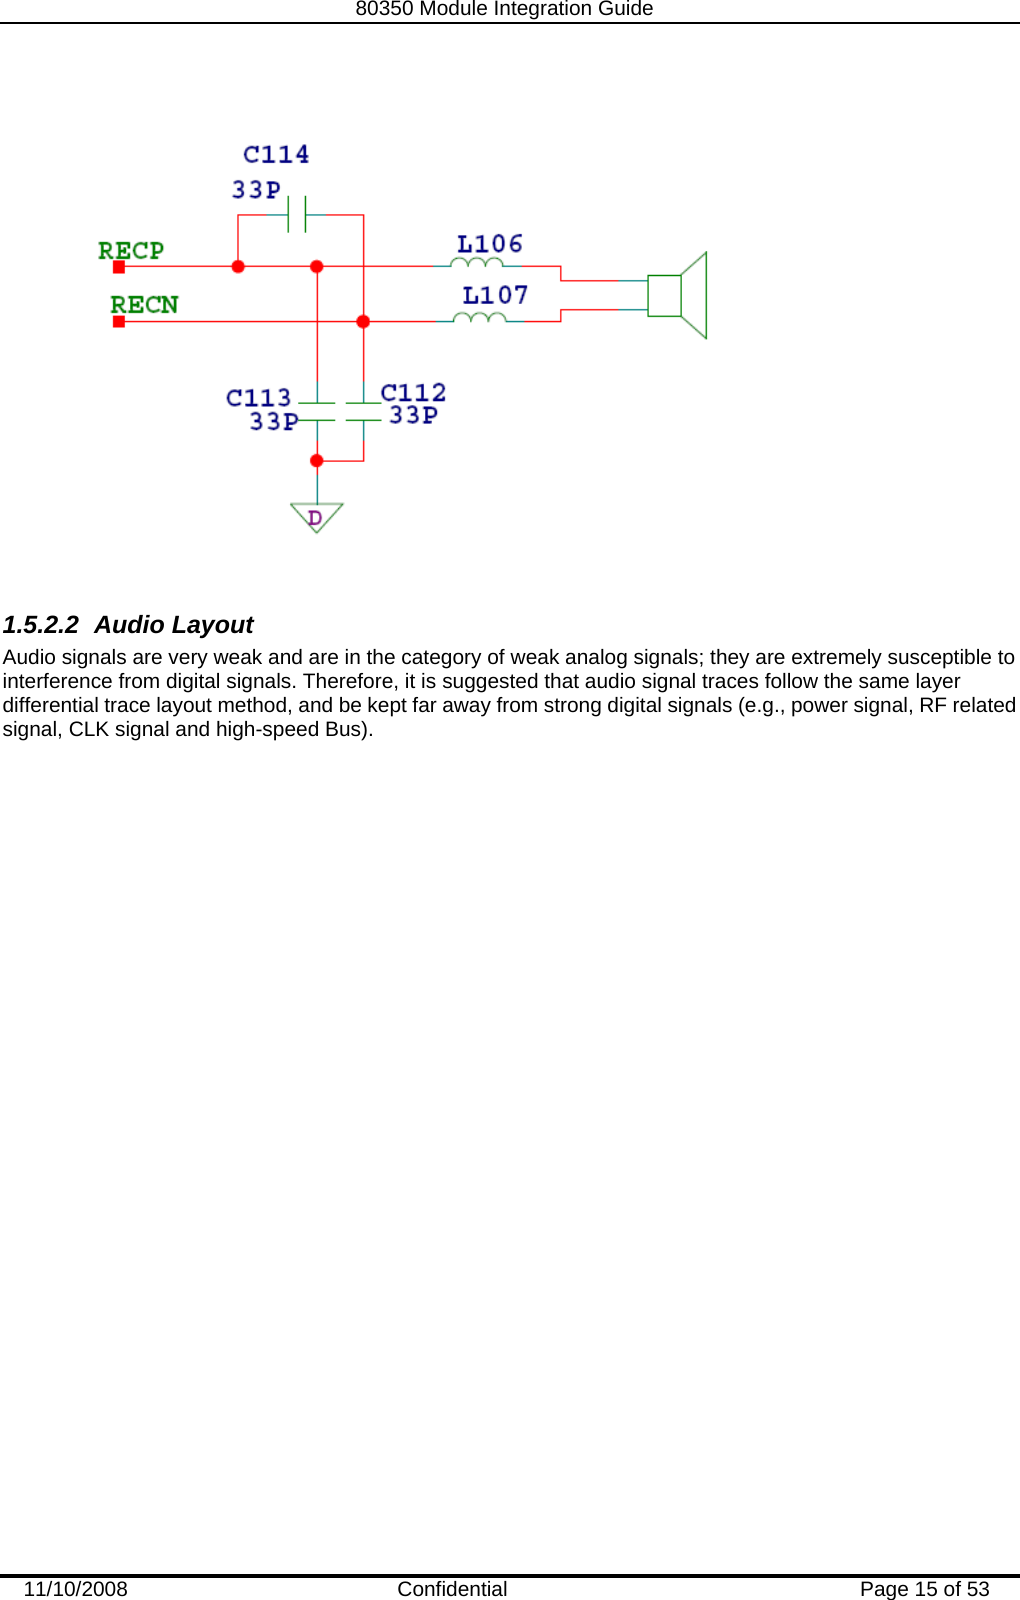   80350 Module Integration Guide  11/10/2008    Confidential  Page 15 of 53   1.5.2.2 Audio Layout Audio signals are very weak and are in the category of weak analog signals; they are extremely susceptible to interference from digital signals. Therefore, it is suggested that audio signal traces follow the same layer differential trace layout method, and be kept far away from strong digital signals (e.g., power signal, RF related signal, CLK signal and high-speed Bus).   